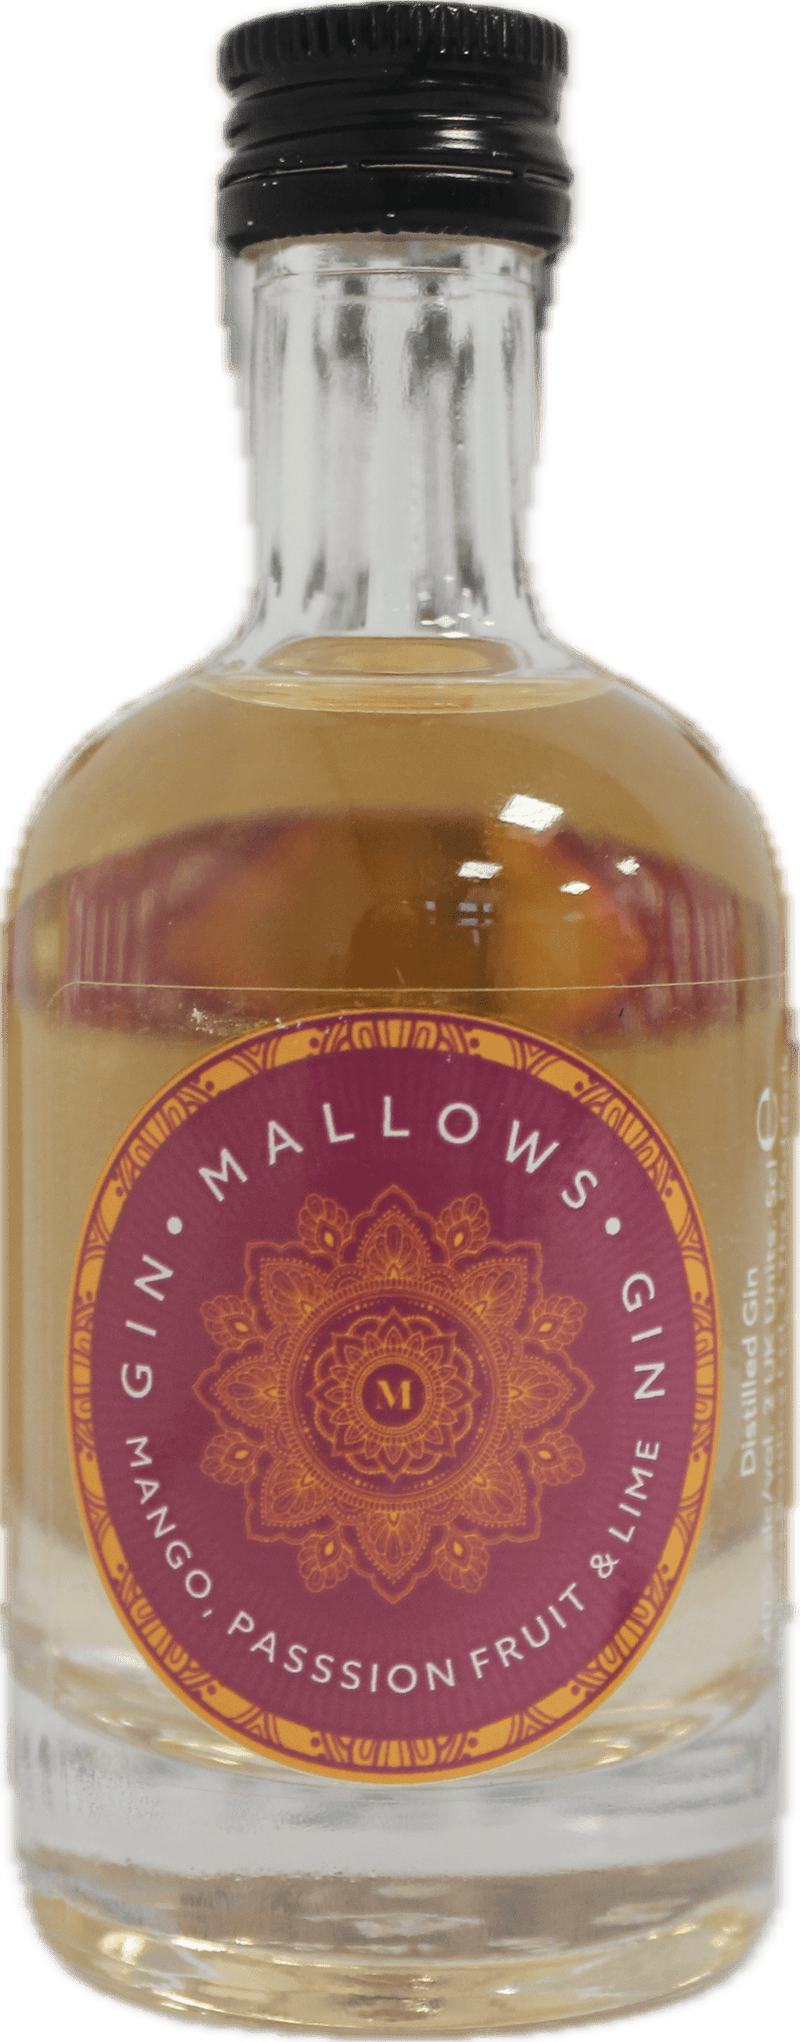 Mallows Mango, Passion Fruit & Lime Gin Miniature 5cl